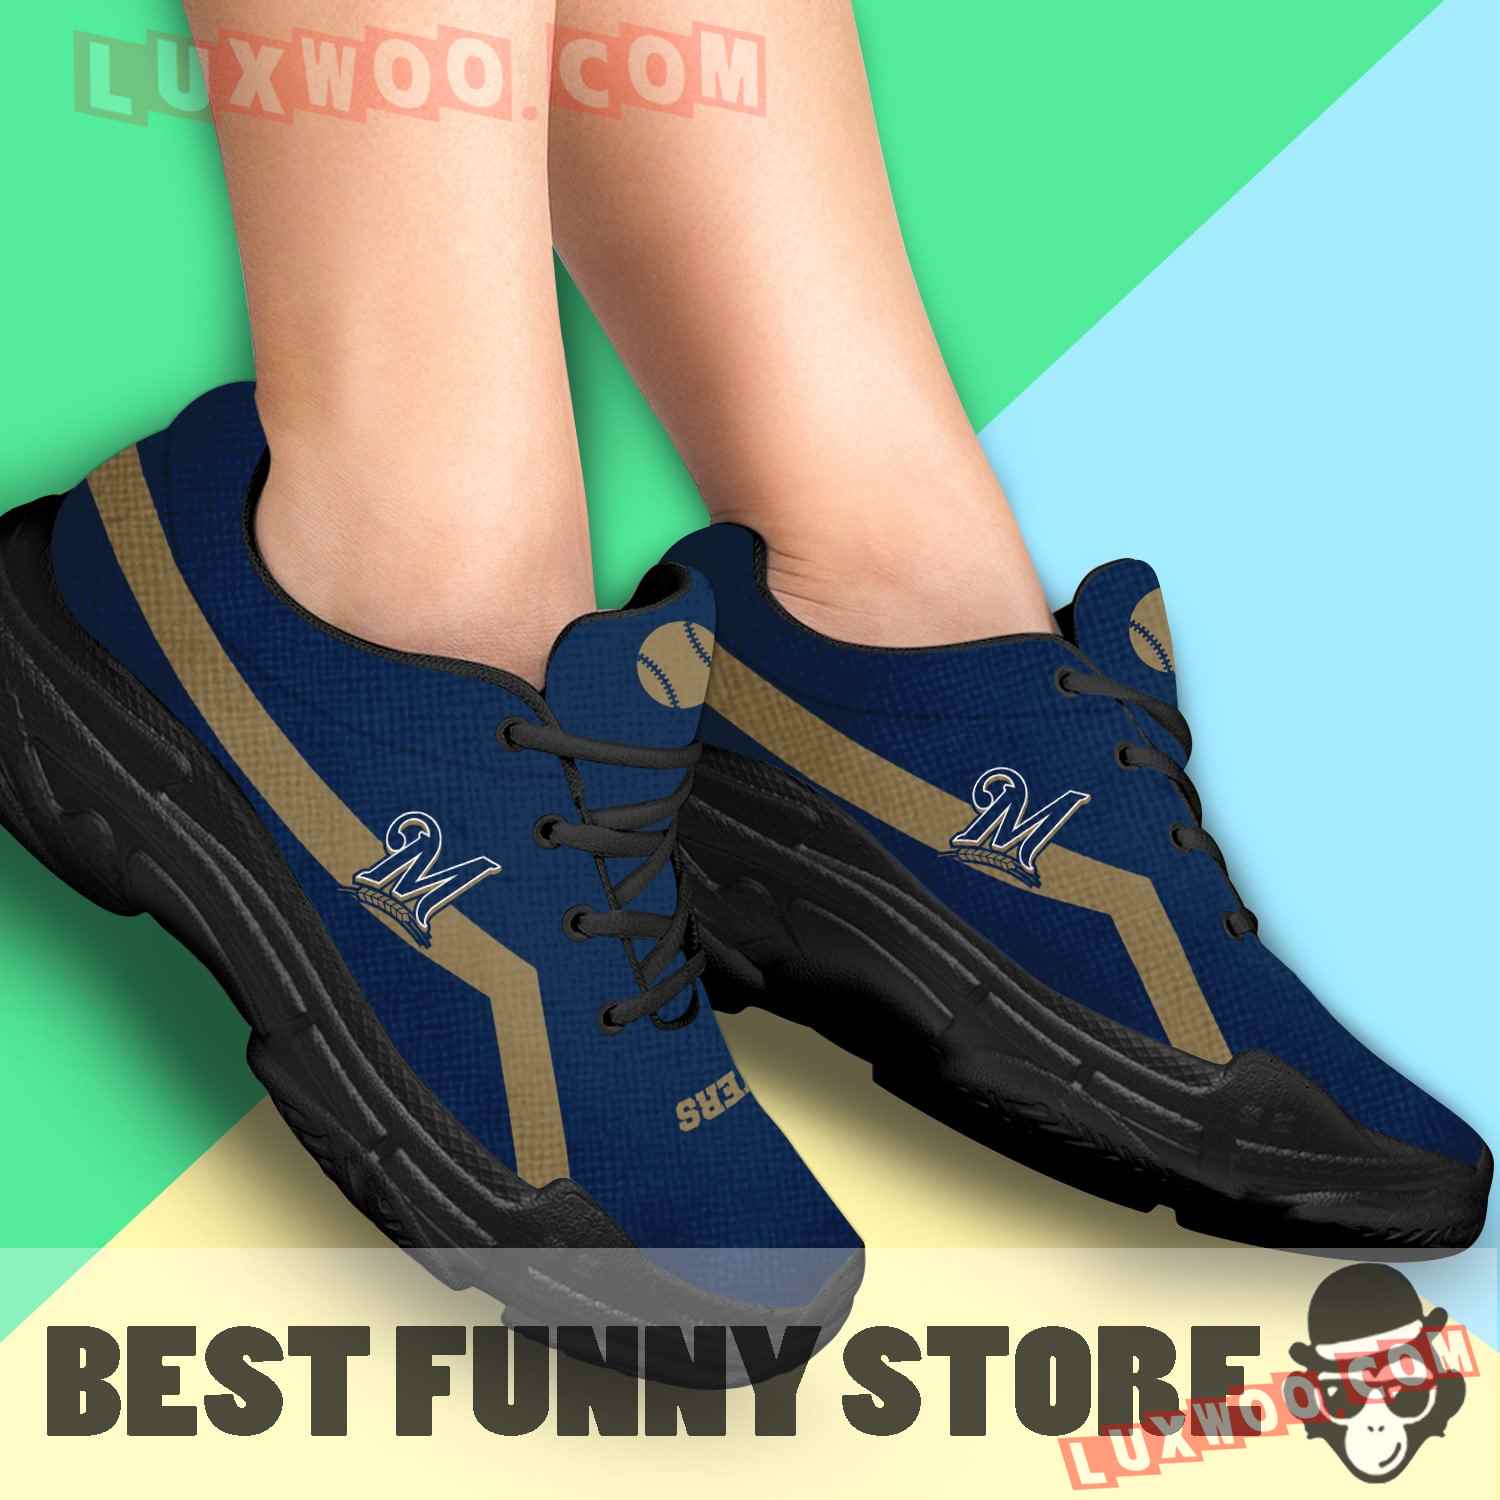 Edition Chunky Sneakers With Line Milwaukee Brewers Shoes - Luxwoo.com